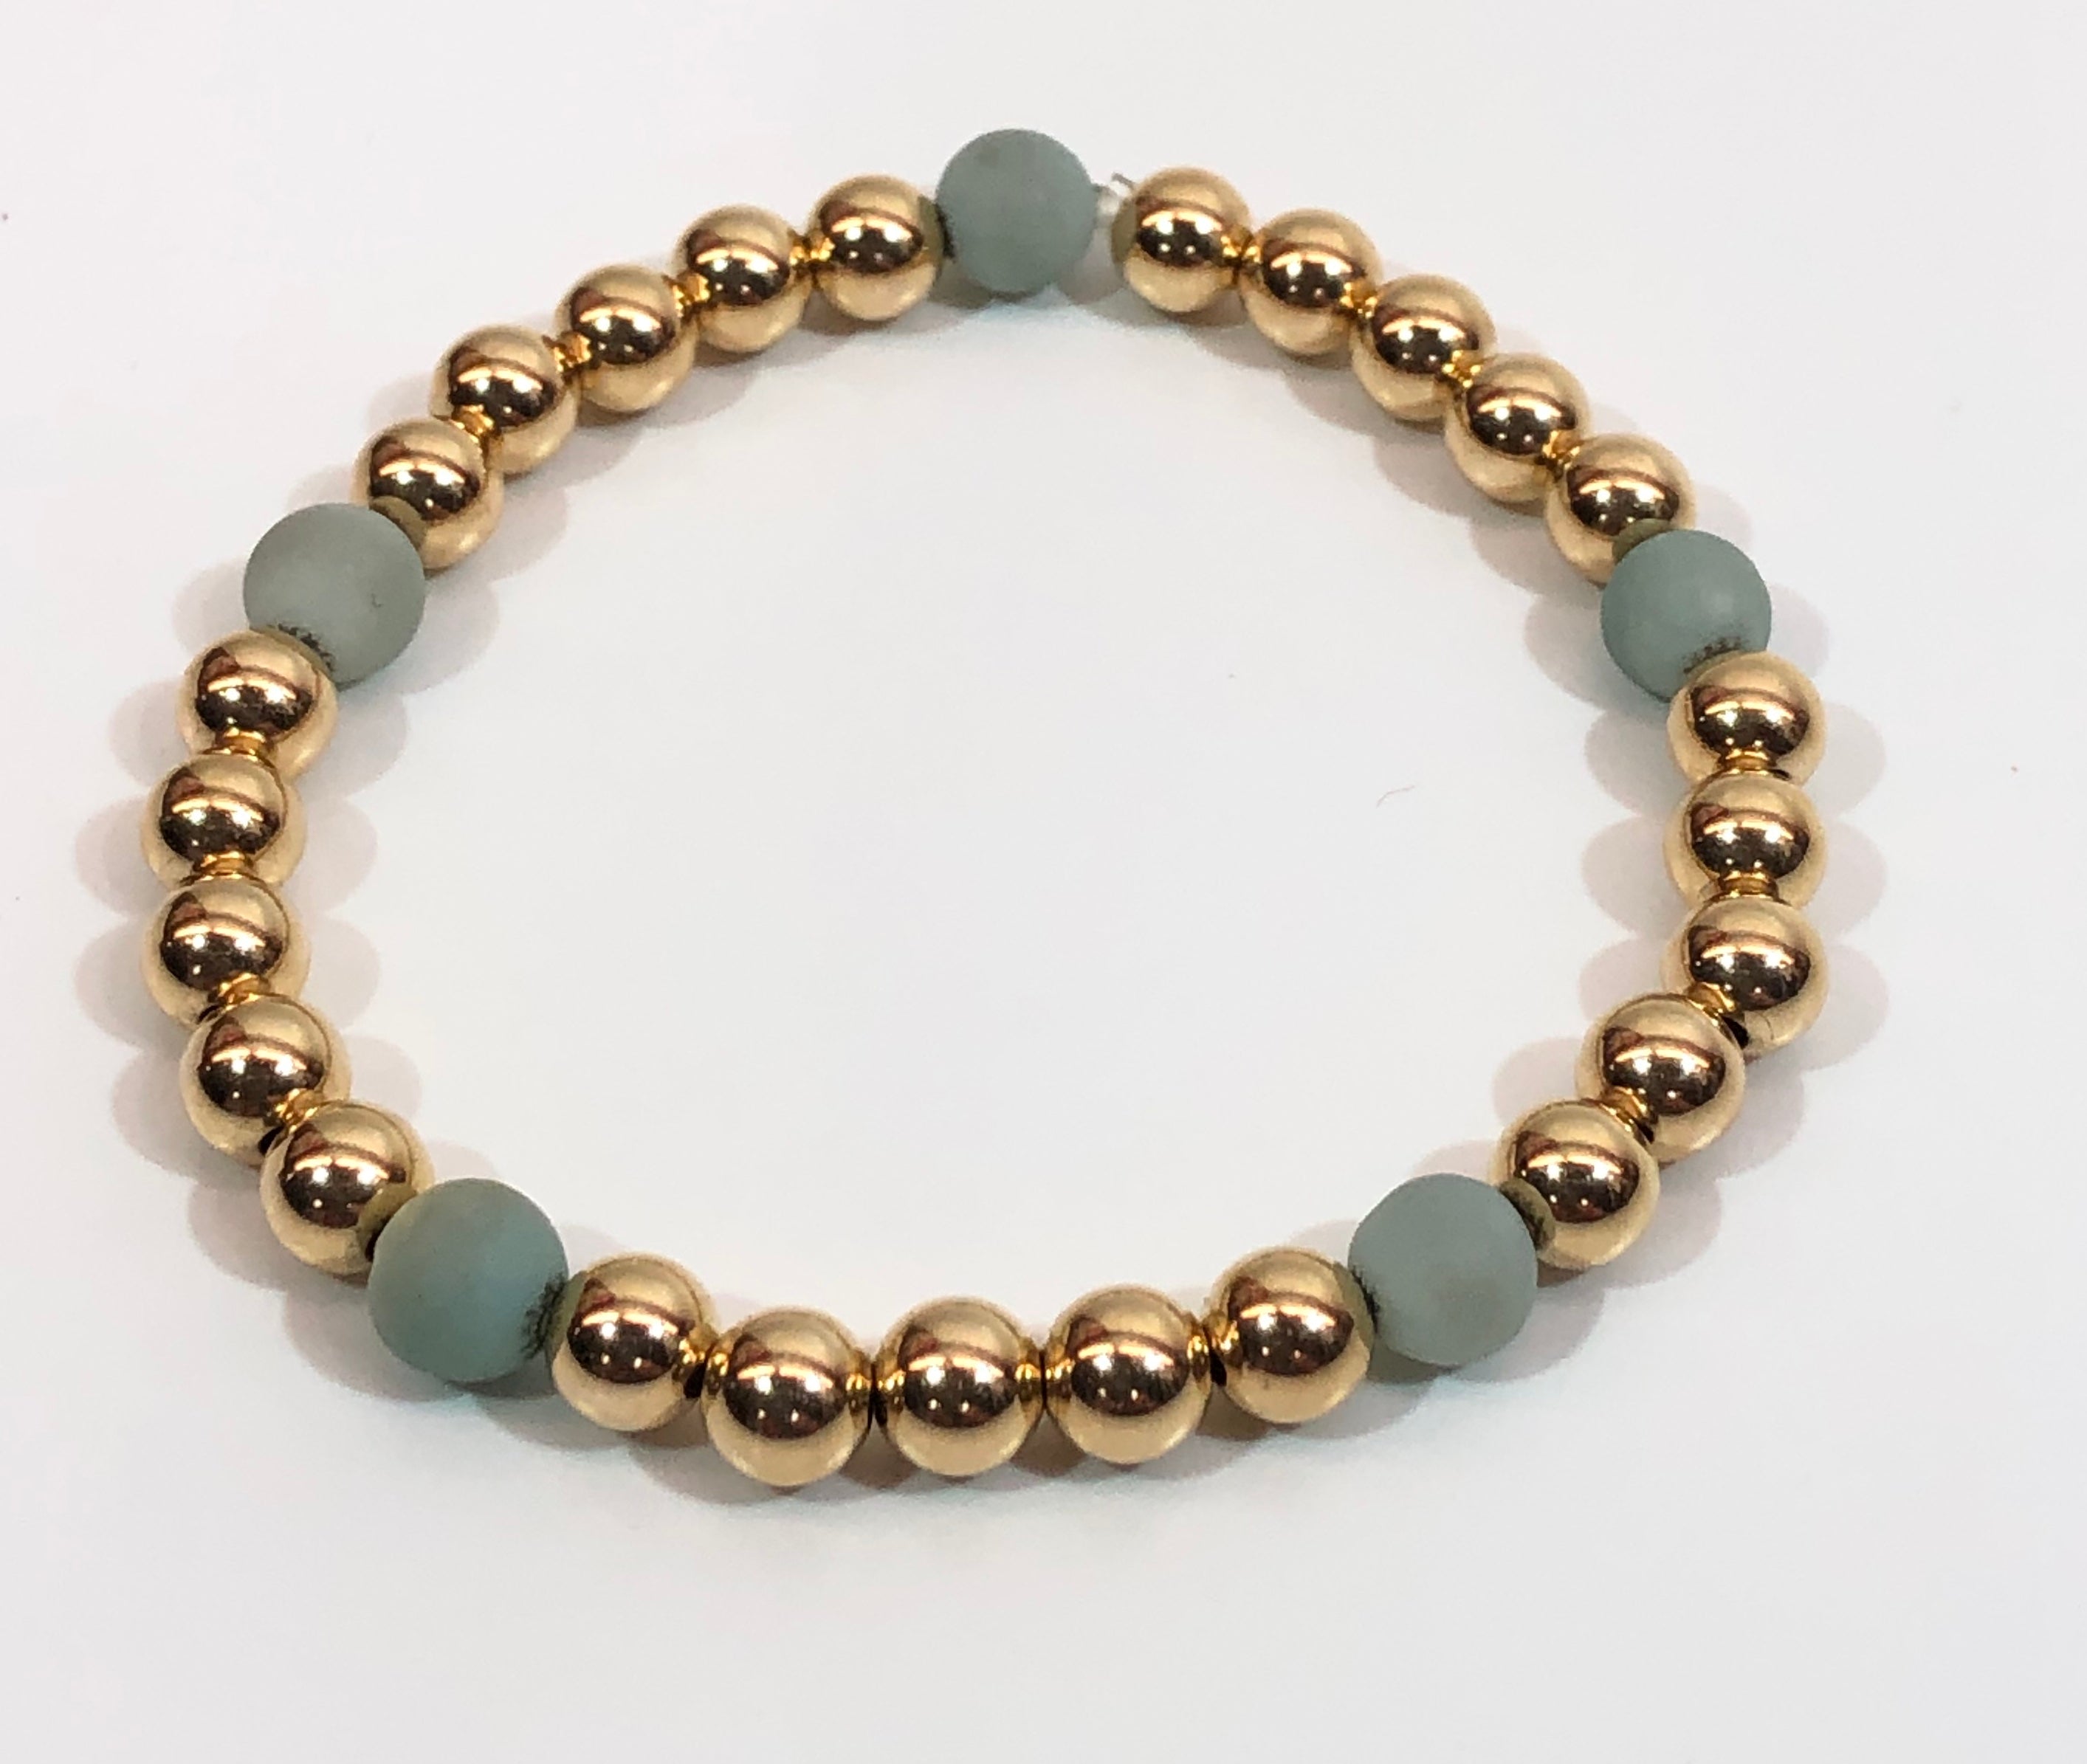 6mm 14kt Gold Filled Bead Bracelet with 5 Light Green Amazonite Beads